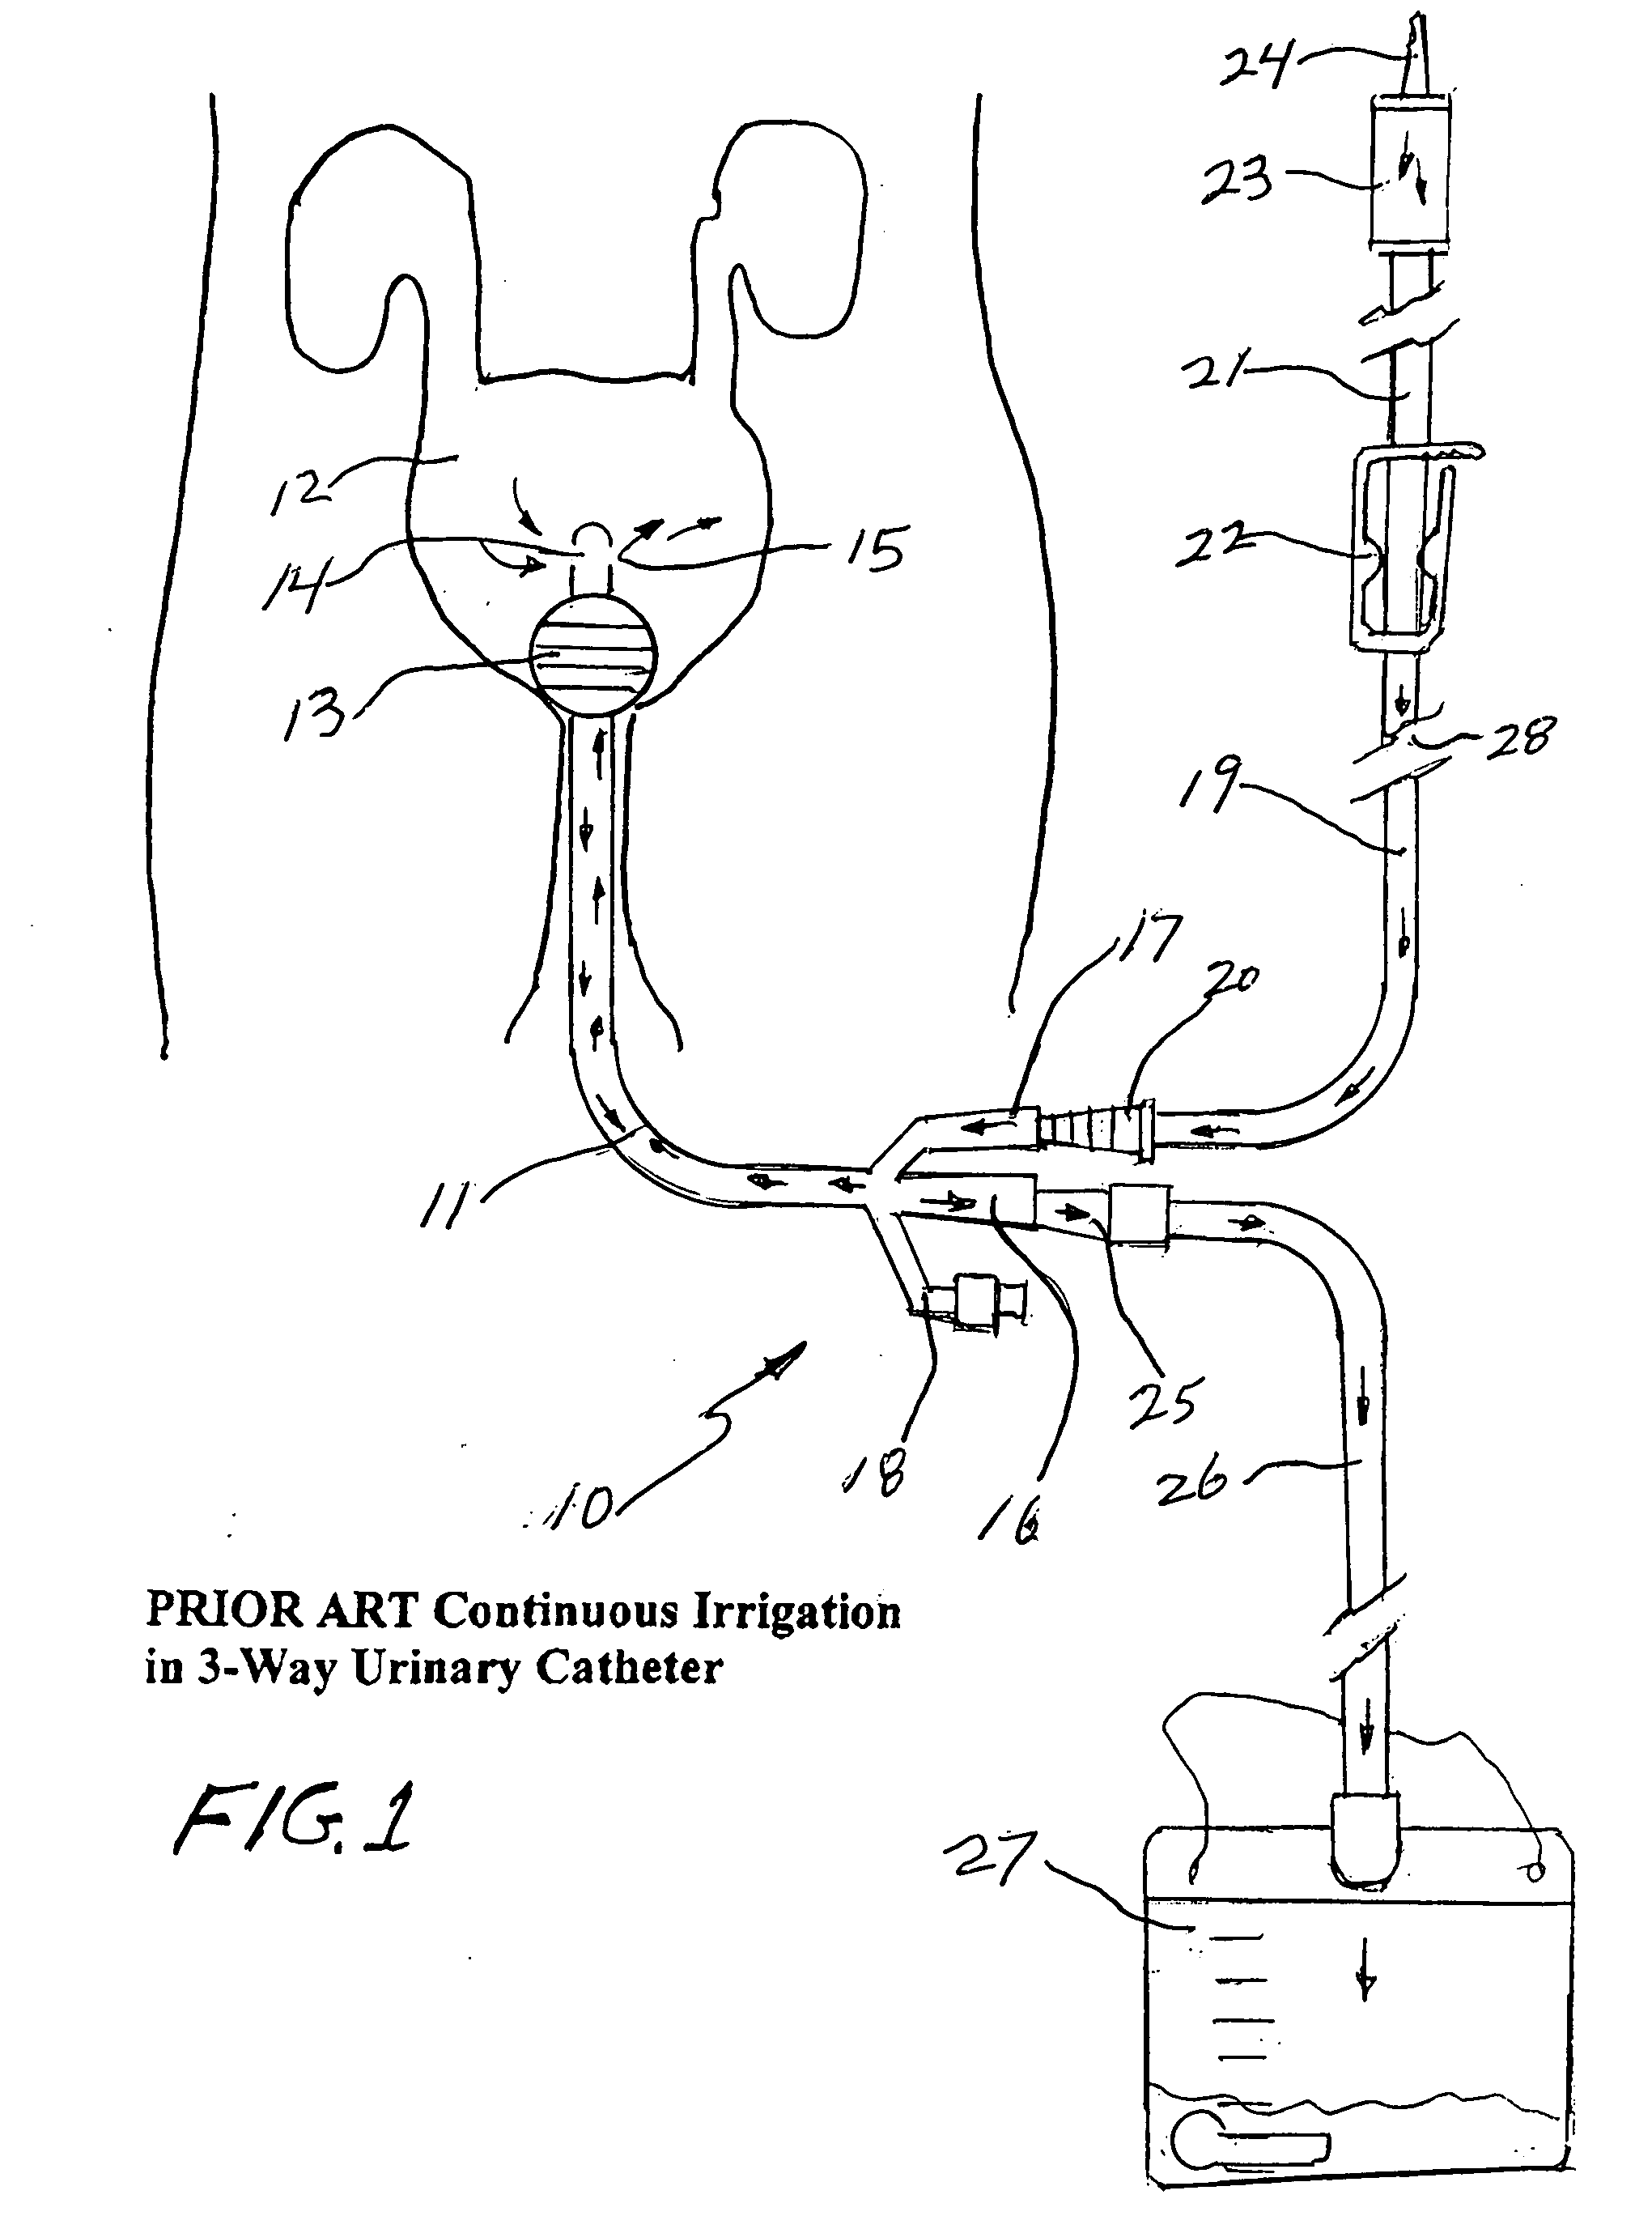 Closed system irrigation connector for urinary catheters